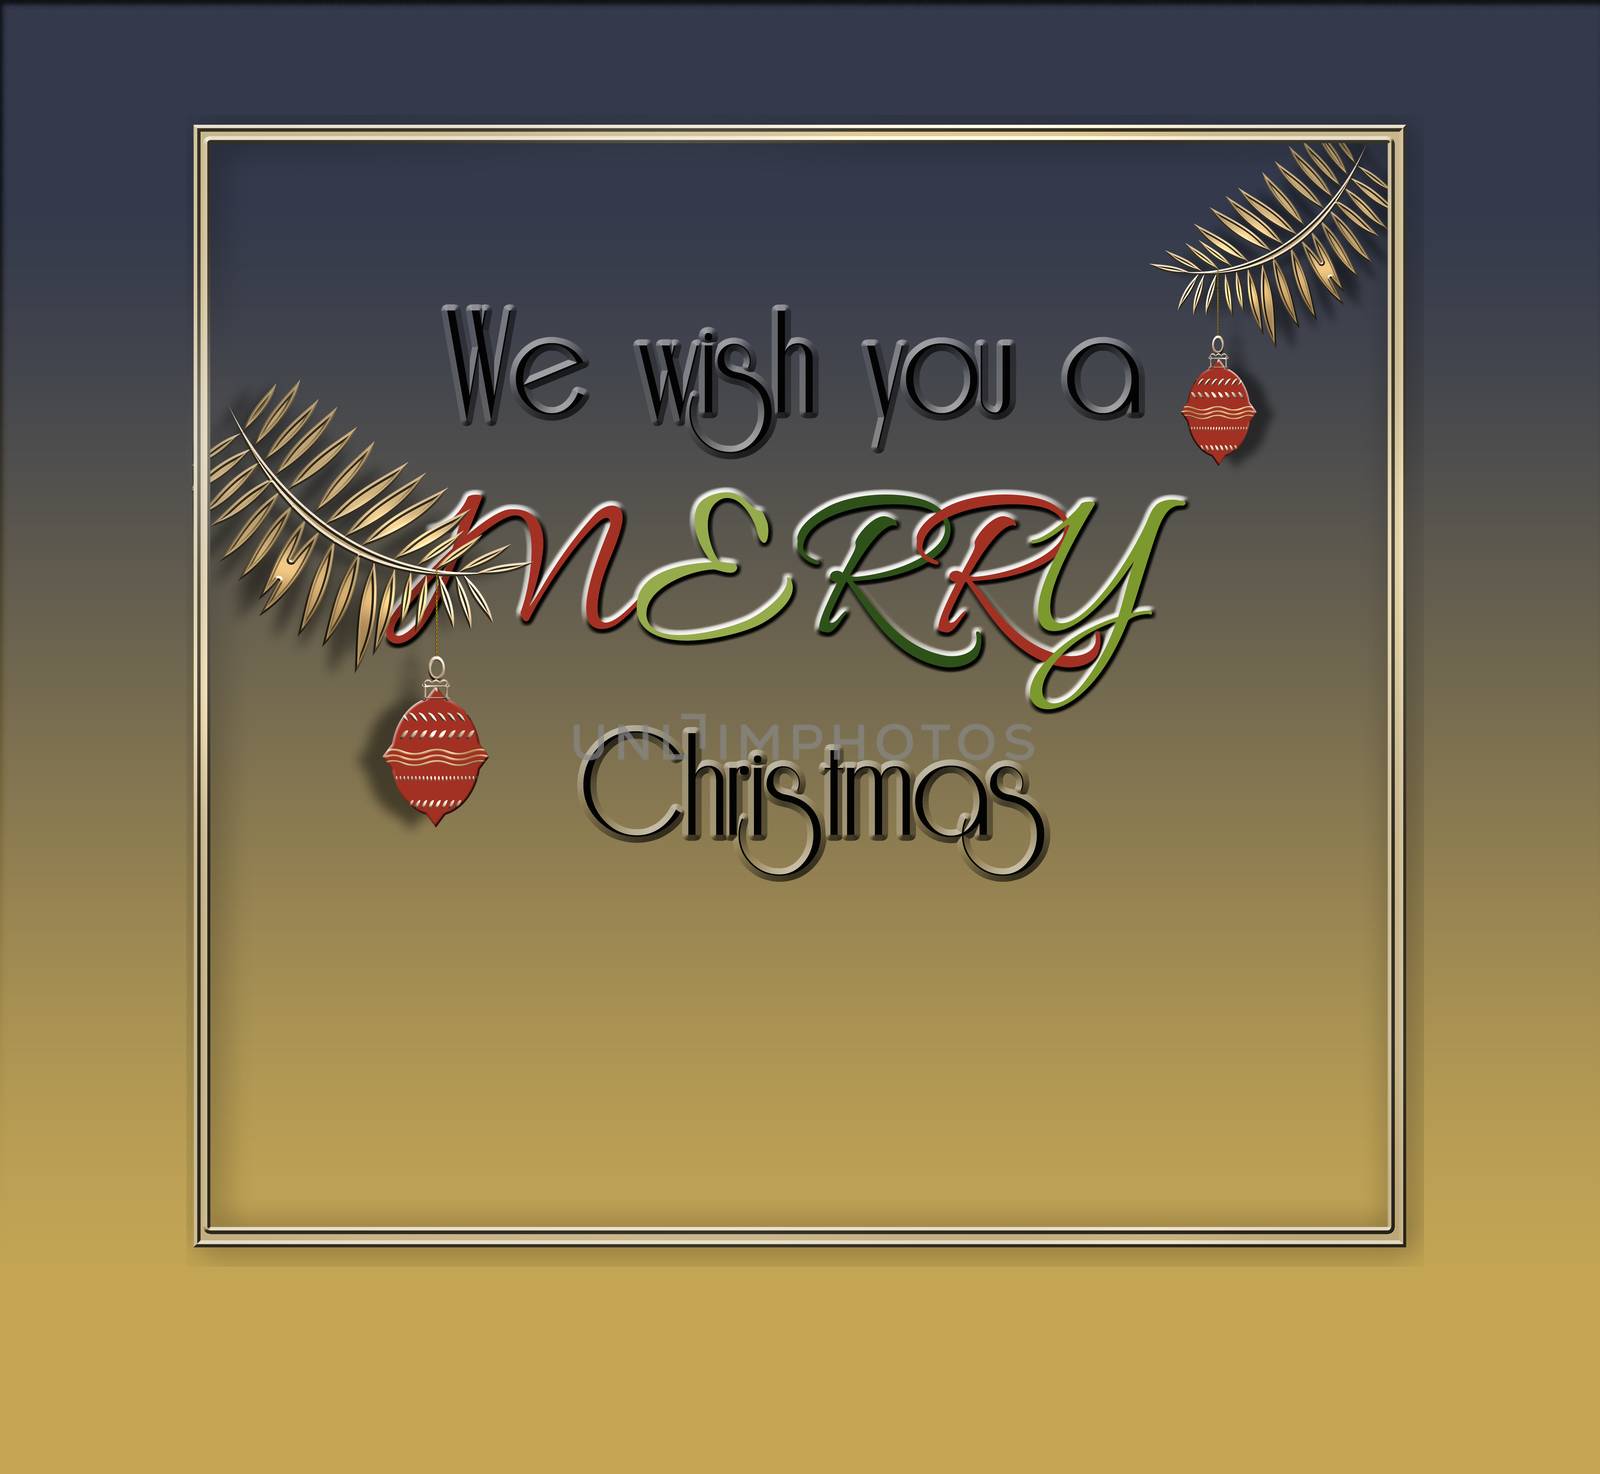 Elegant stylish Christmas card on blue gold background with text We Wish you a Merry Christmas in frame with red hanging balls. Minimalist template design for business cards, banner. 3D illustration